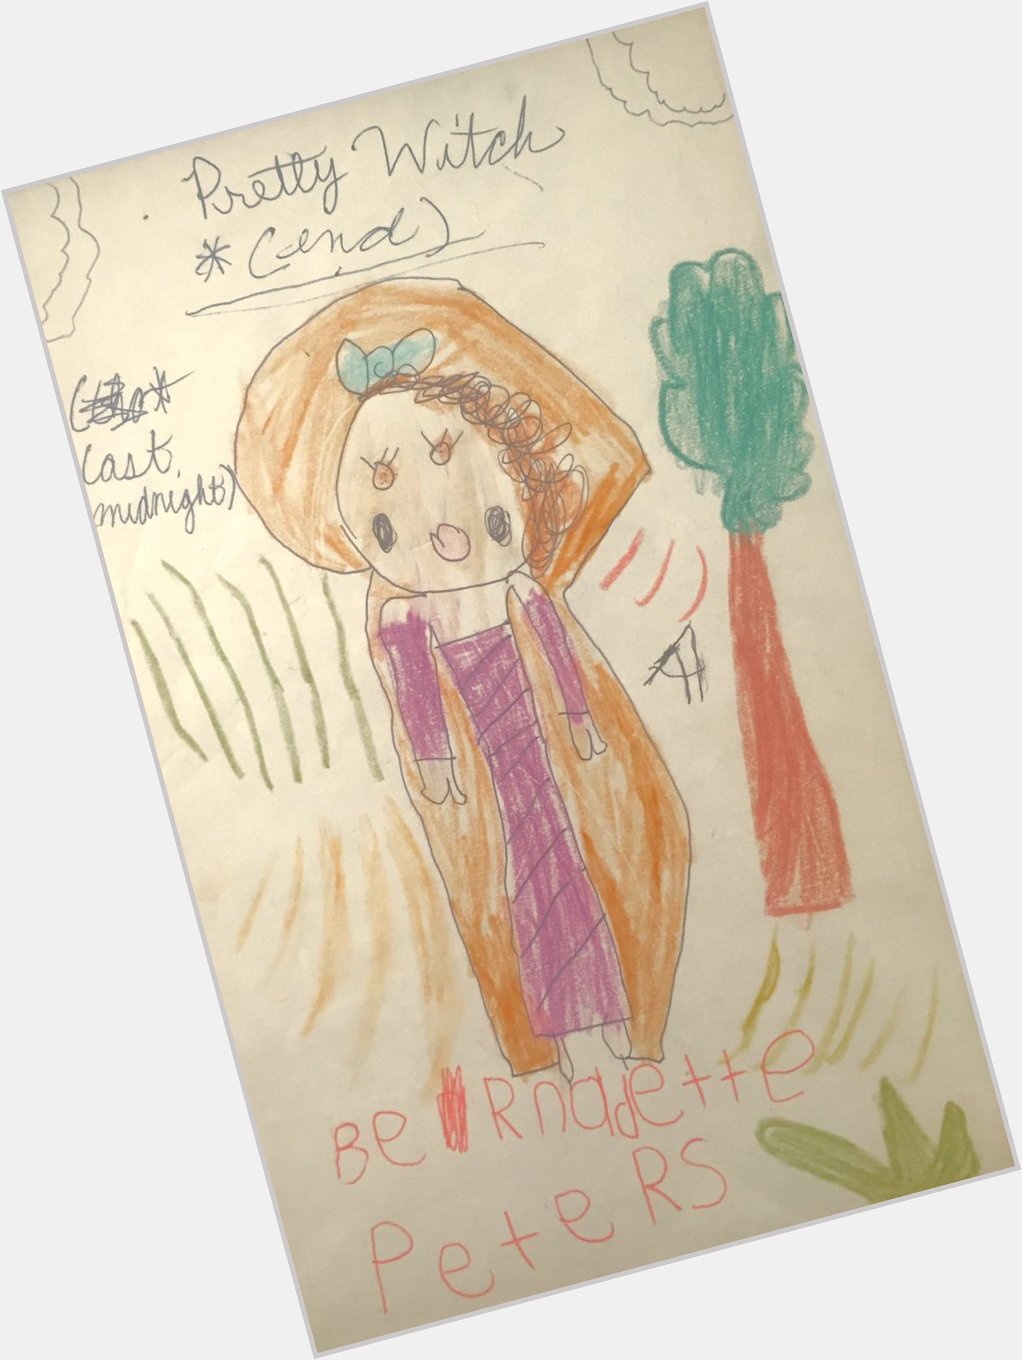 Happy Birthday, Bernadette Peters! (I drew this for you when I was 4.) 